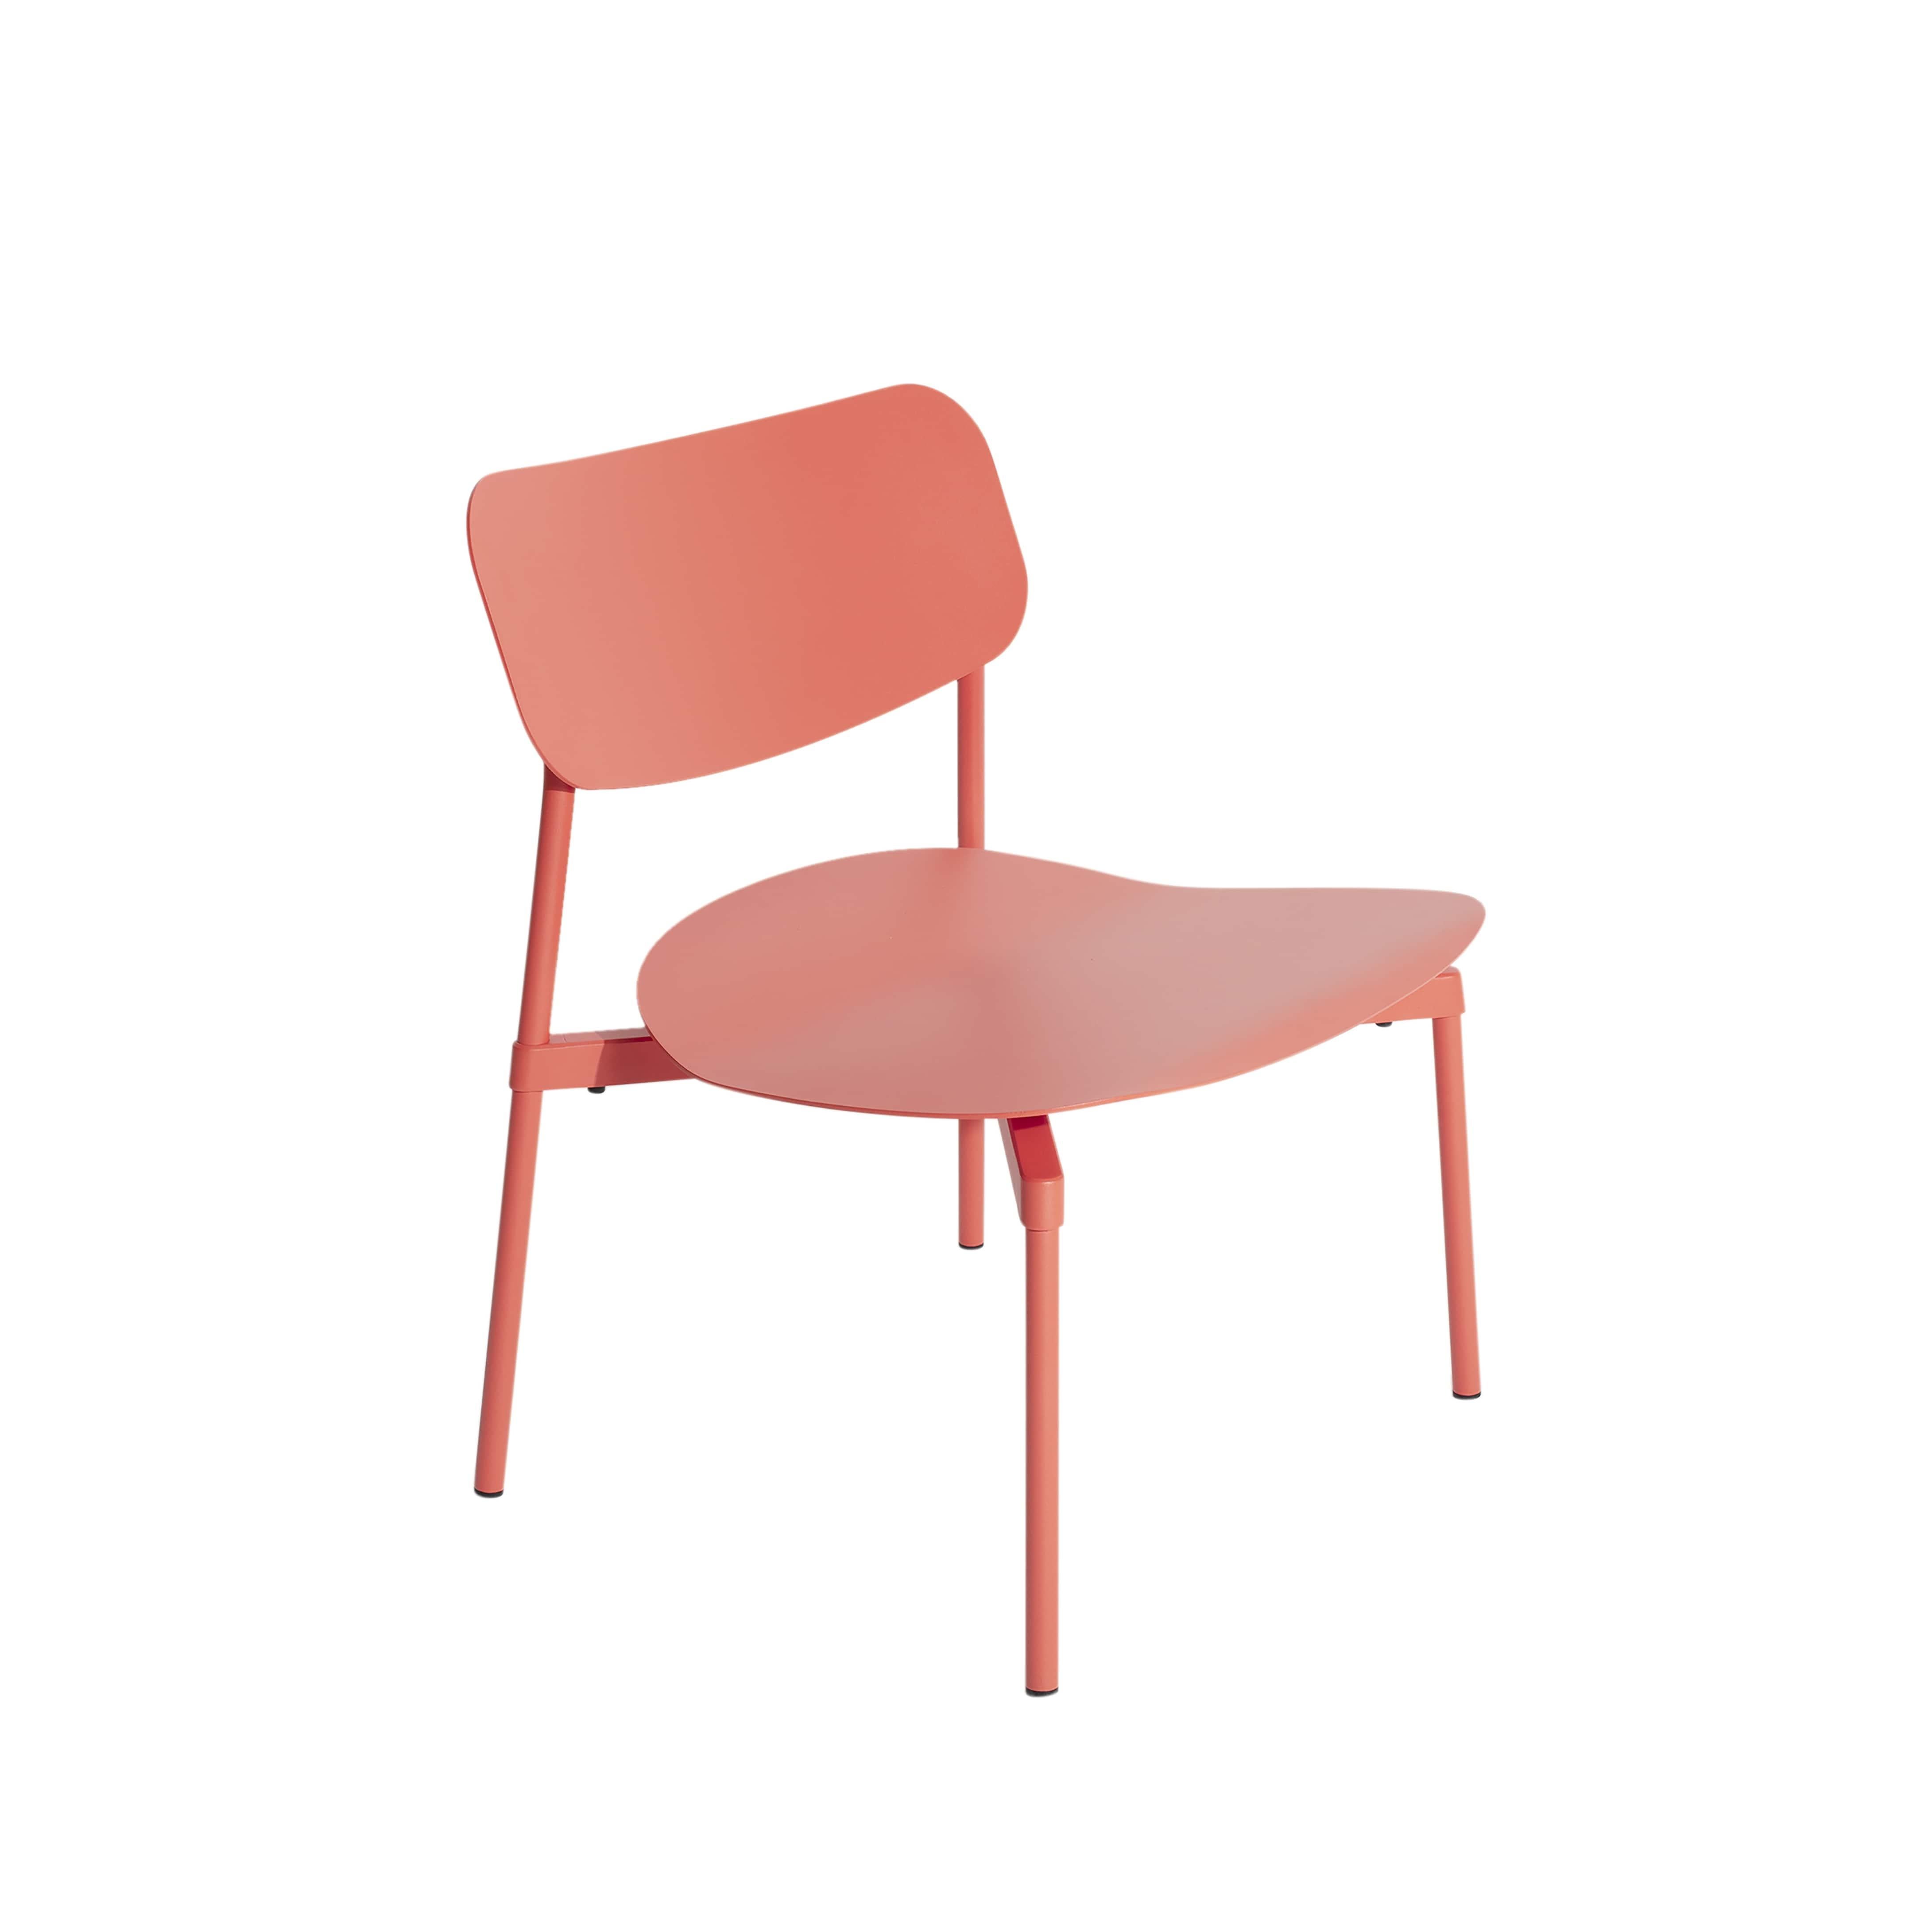 Petite Friture Fromme Lounge Armchair in Coral Aluminium by Tom Chung, 2020

The Fromme collection stands out by its pure line and compact design. Absorbers placed under the seating gives a soft and very comfortable flexibility to seats. Made from